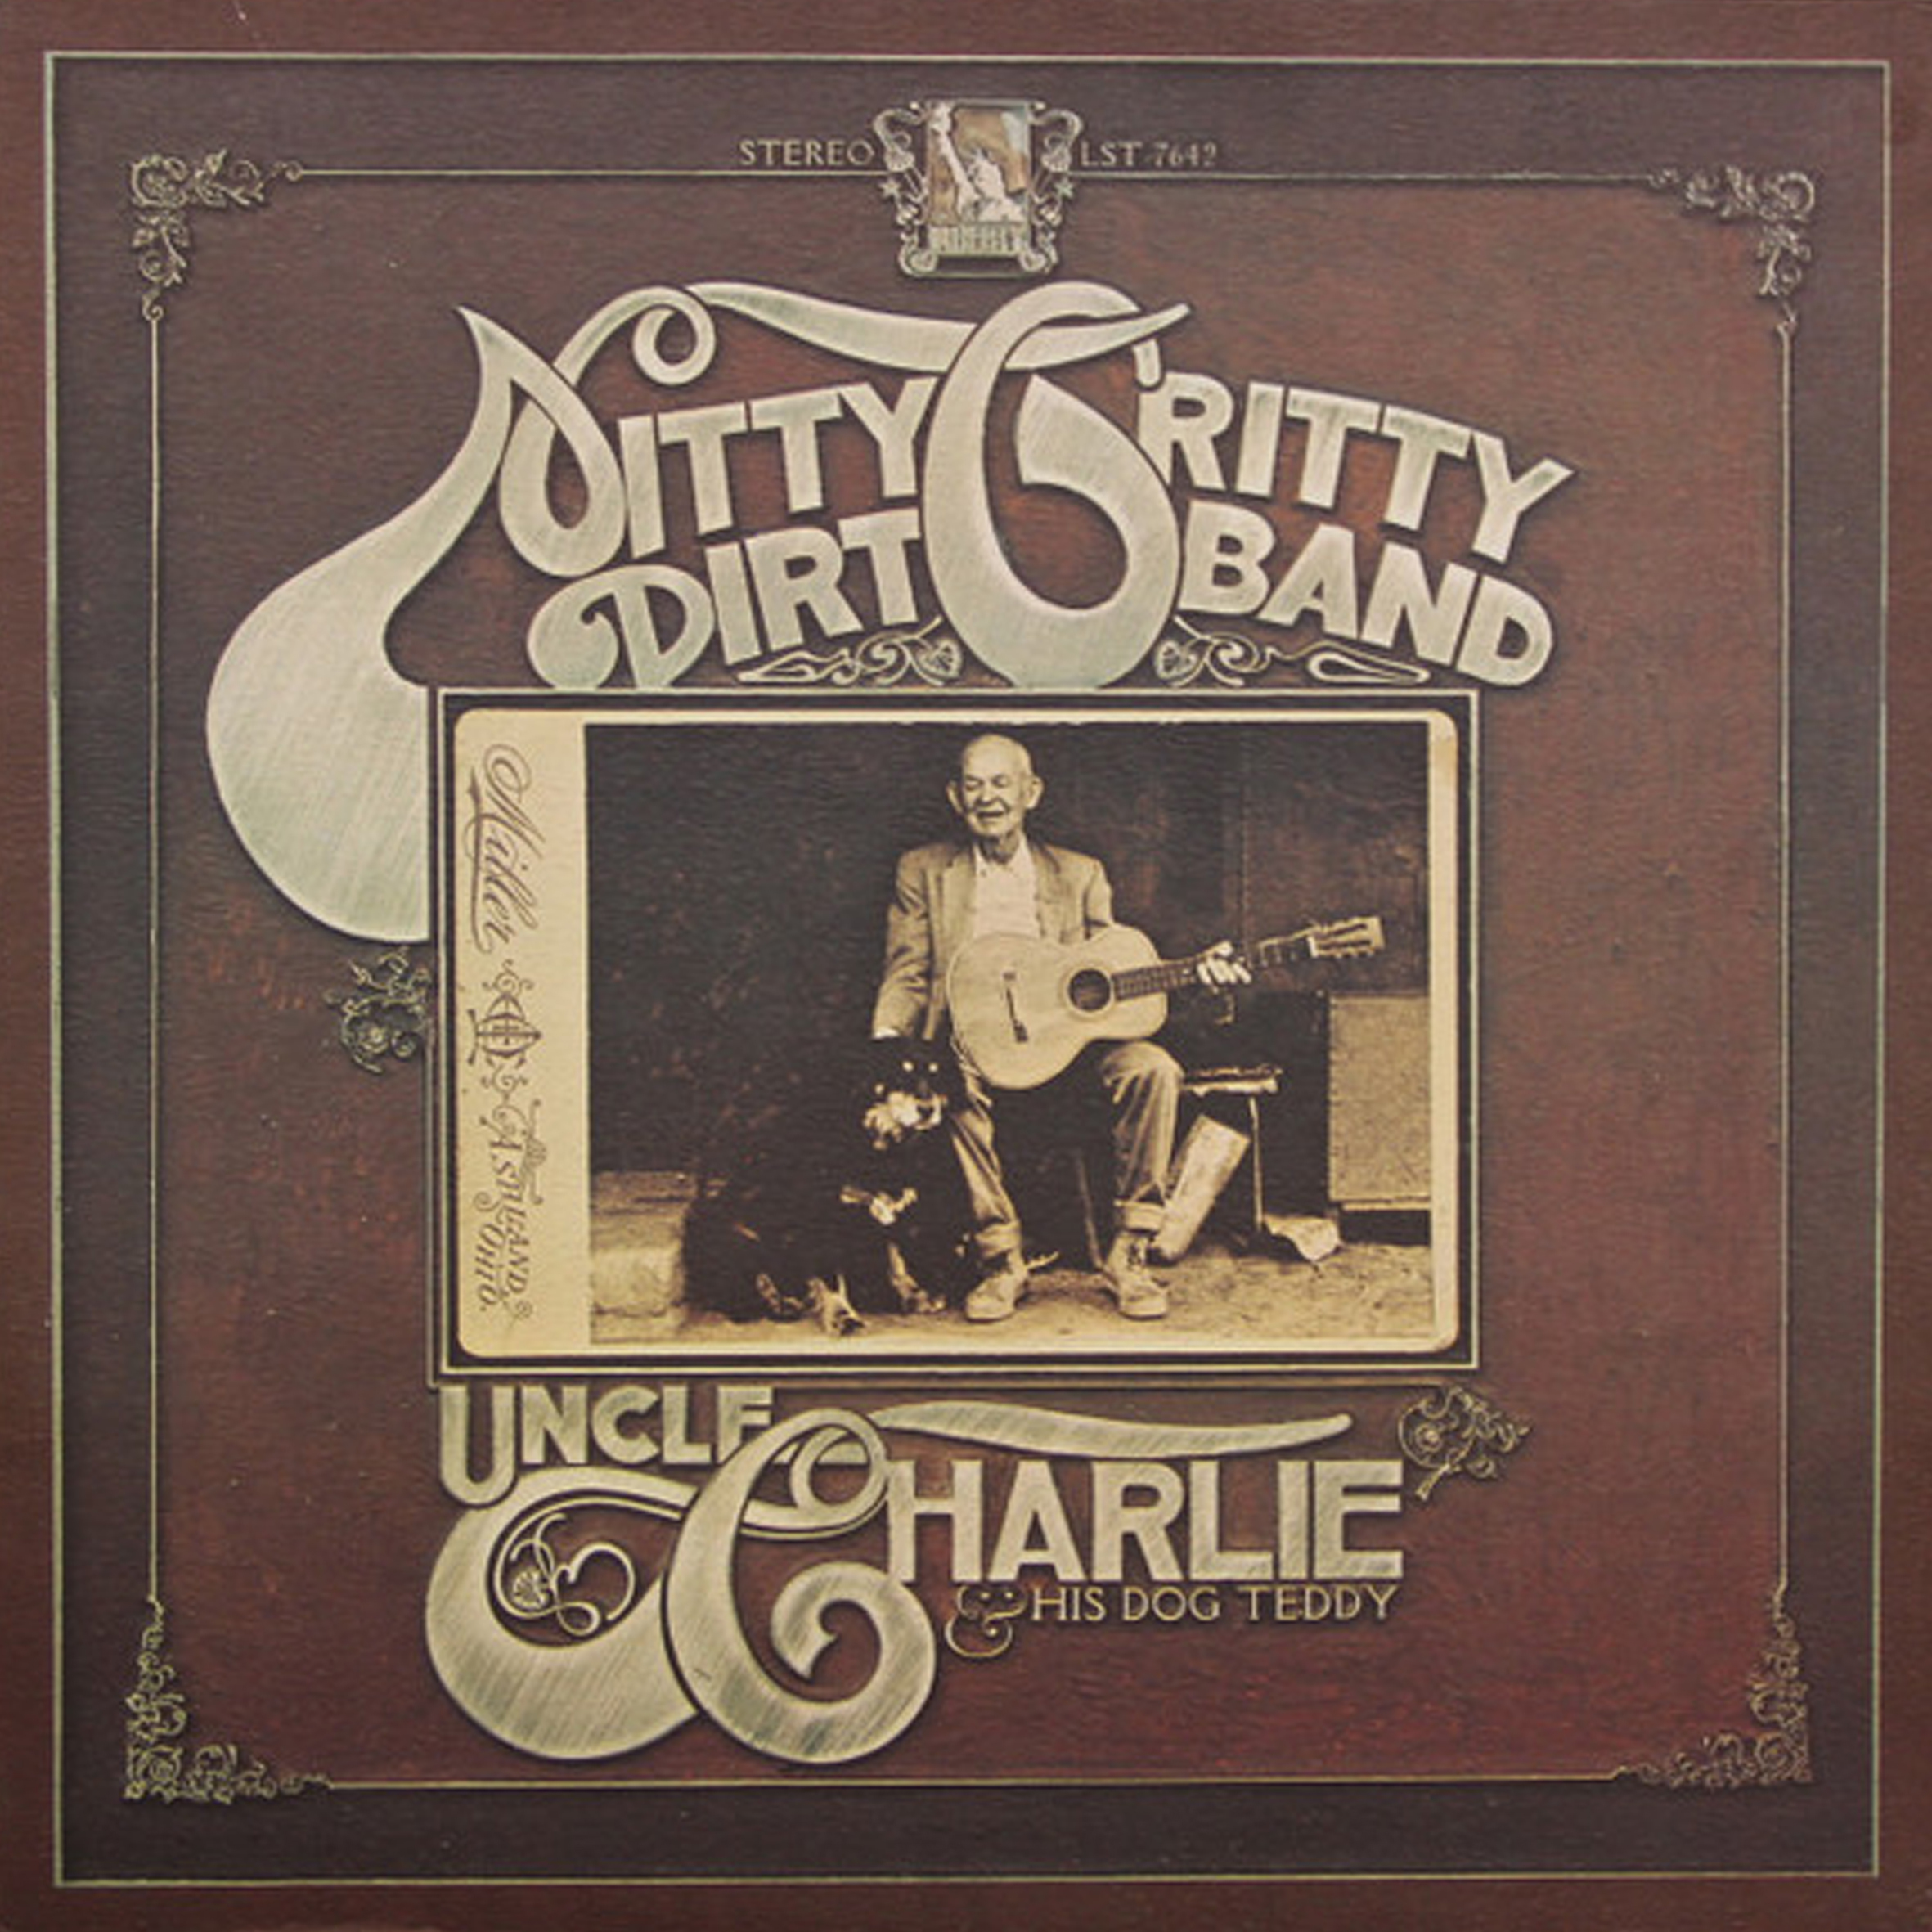 Vinil - Nitty Gritty Dirt Band - Uncle Charlie and His Dog Teddy